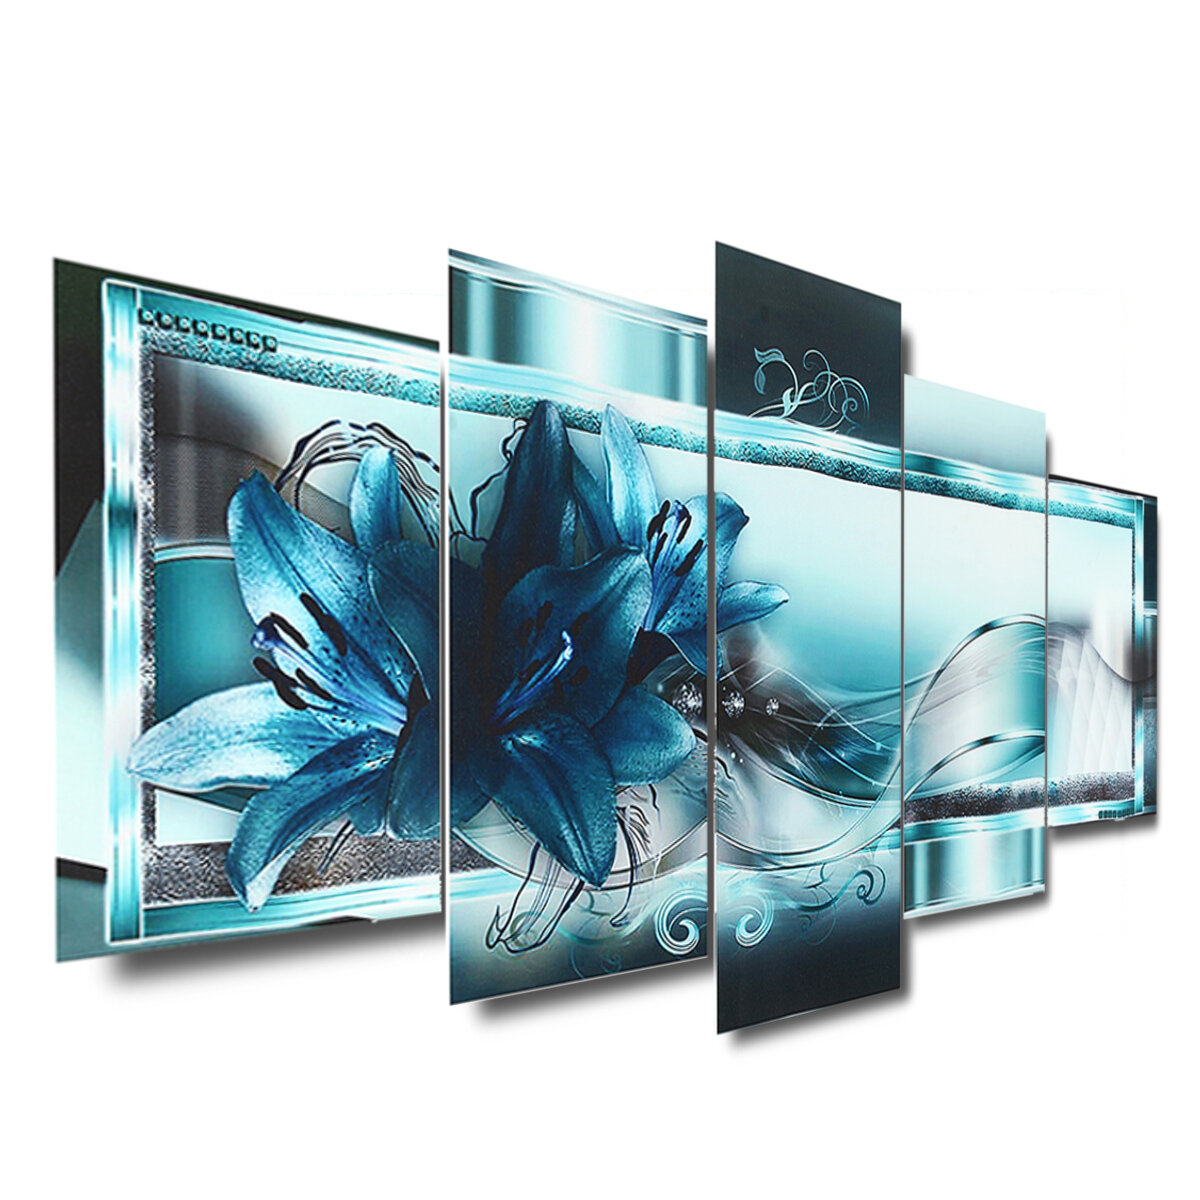 

5 Panels Unframed Modern Canvas Blue Abstract Flower Art Hanging Picture Room Wall Art Pictures Home Decoration Supplies